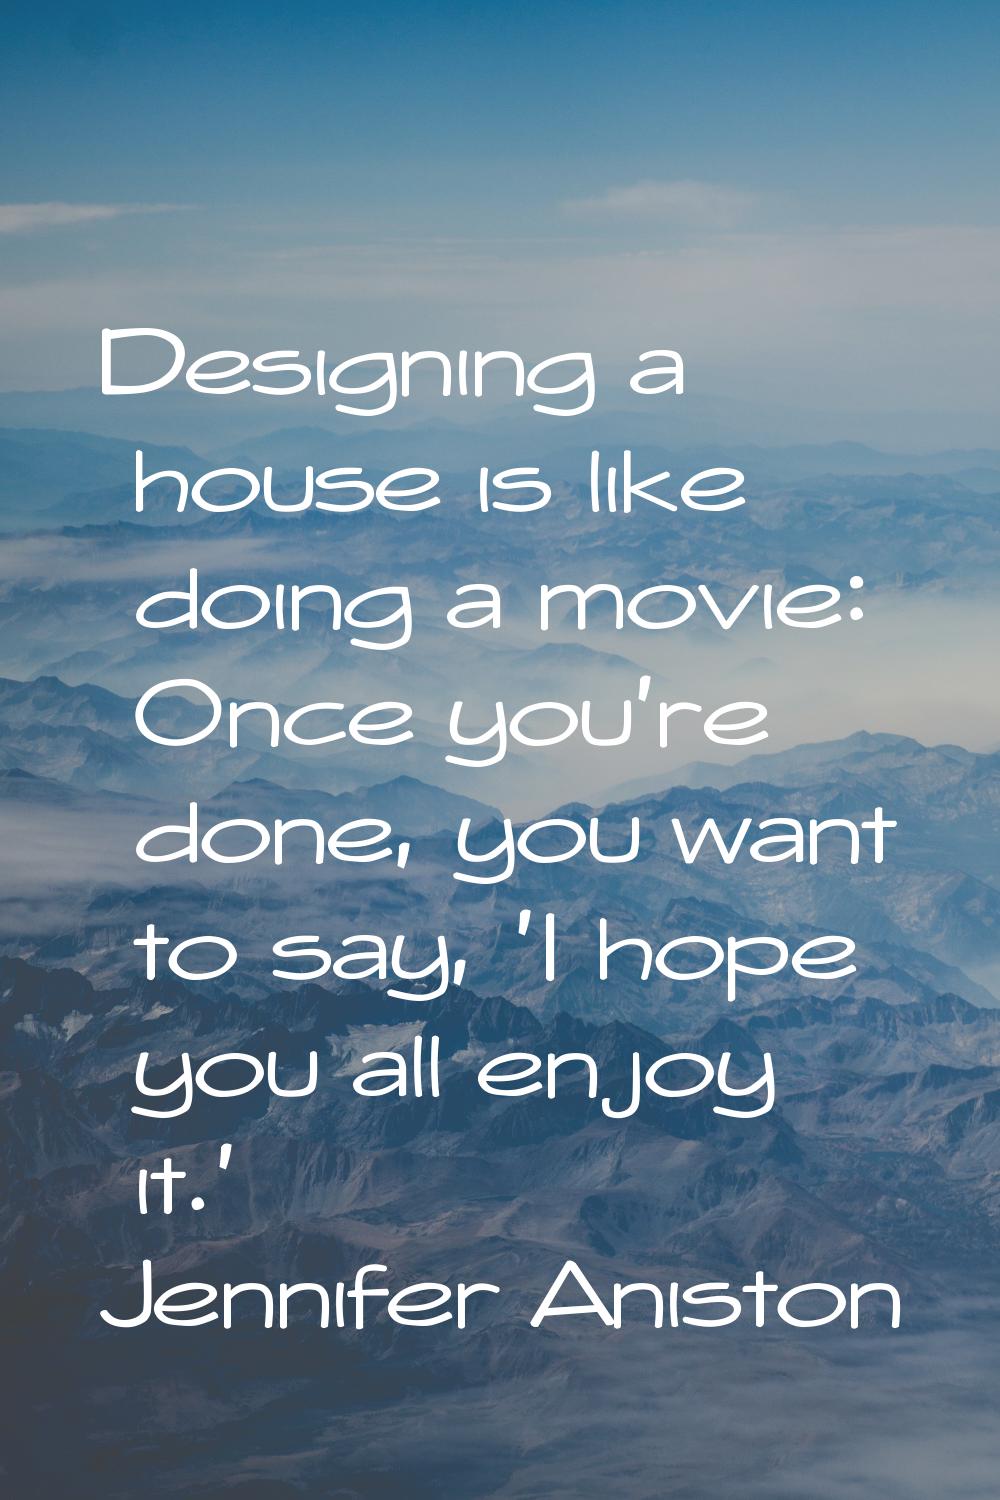 Designing a house is like doing a movie: Once you're done, you want to say, 'I hope you all enjoy i